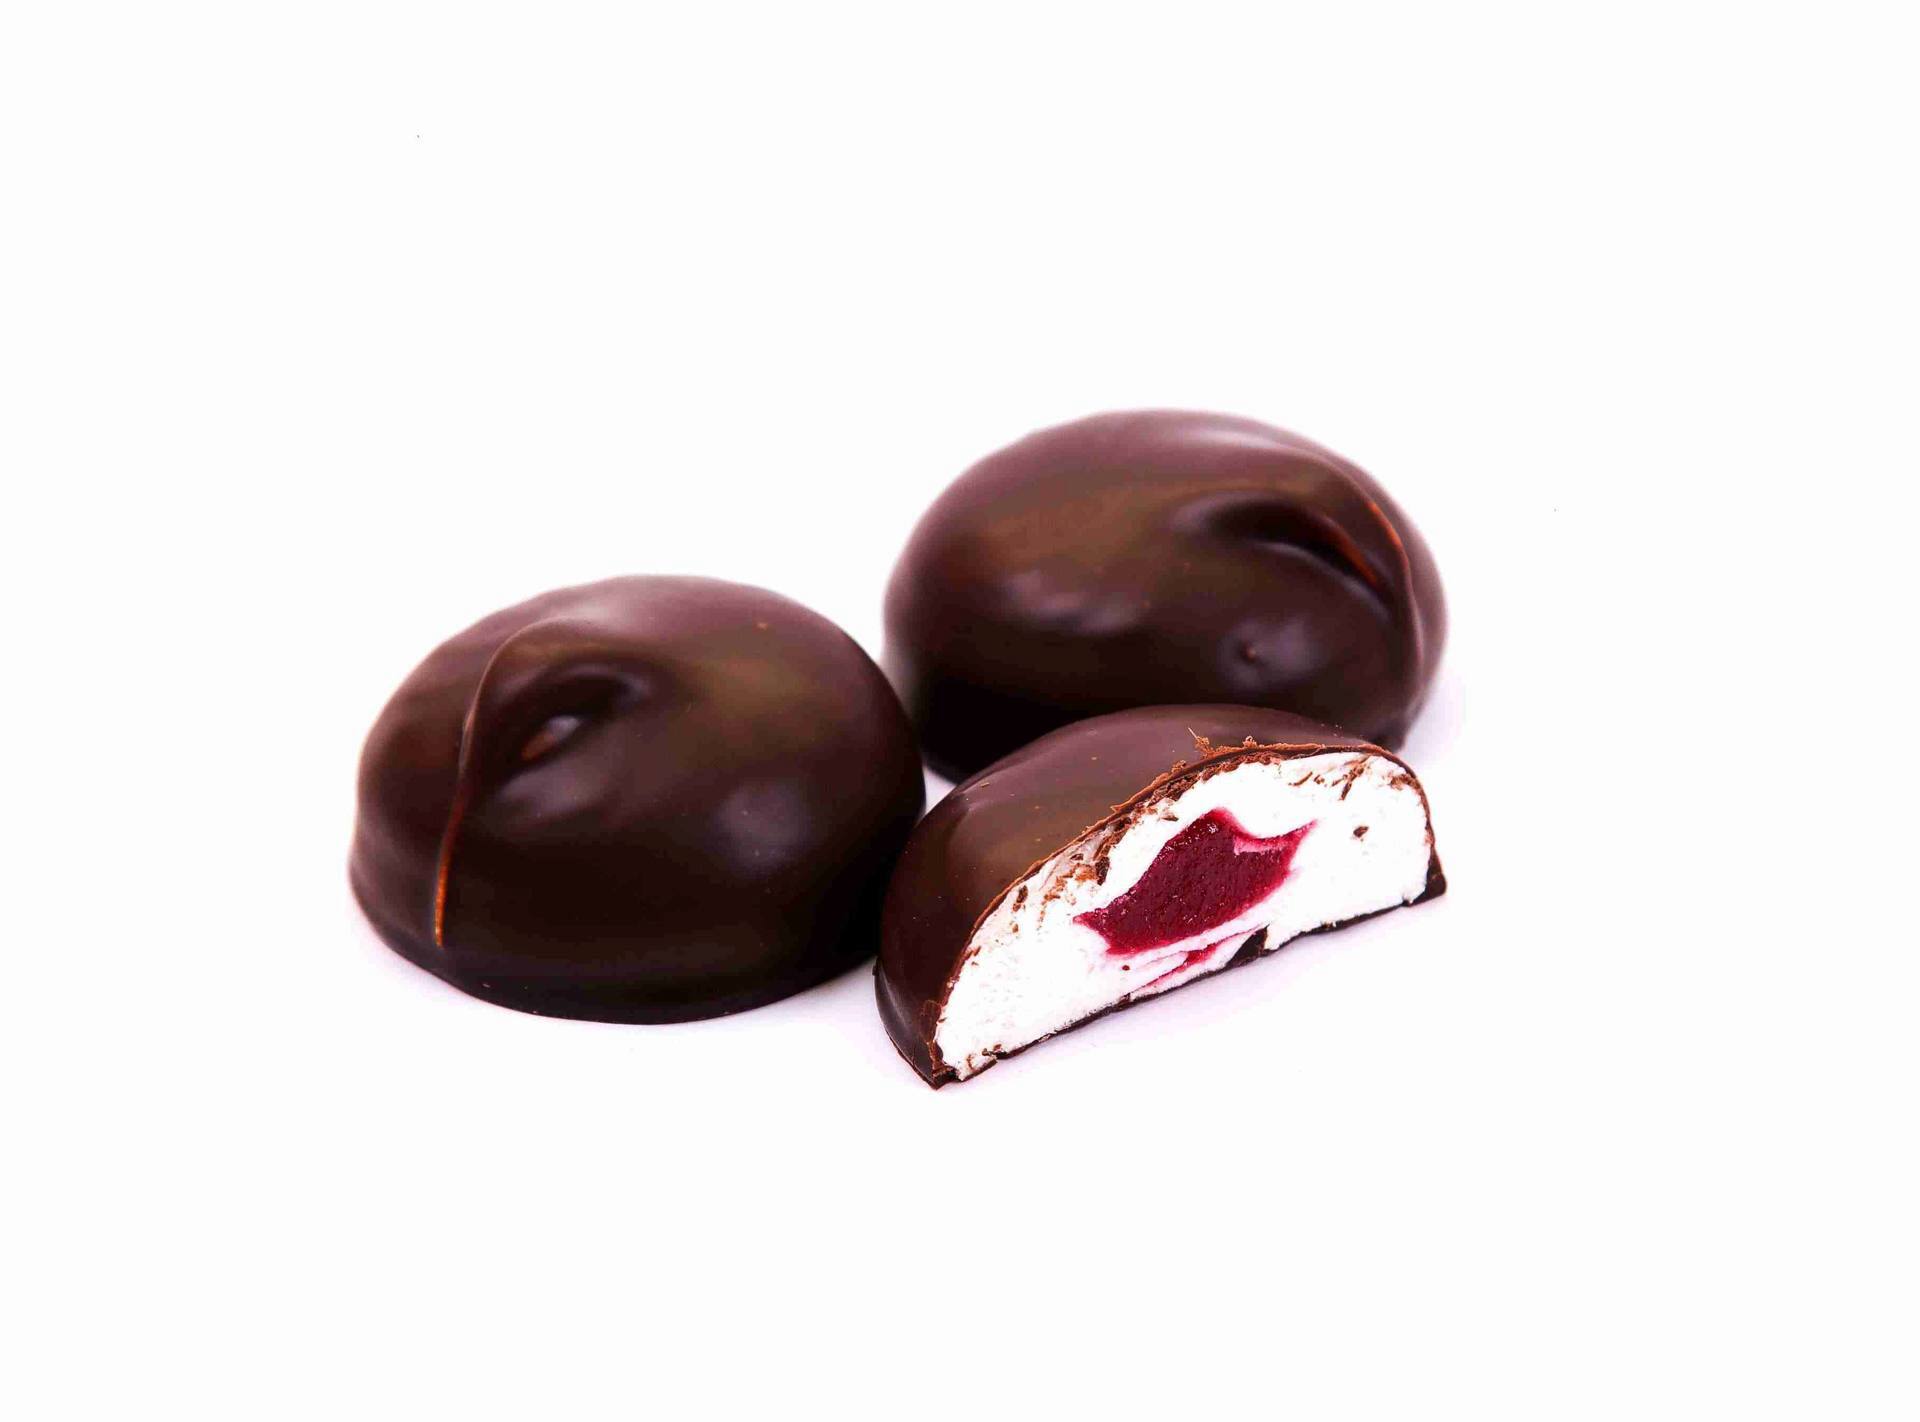 Marshmallow glazed With cranberries